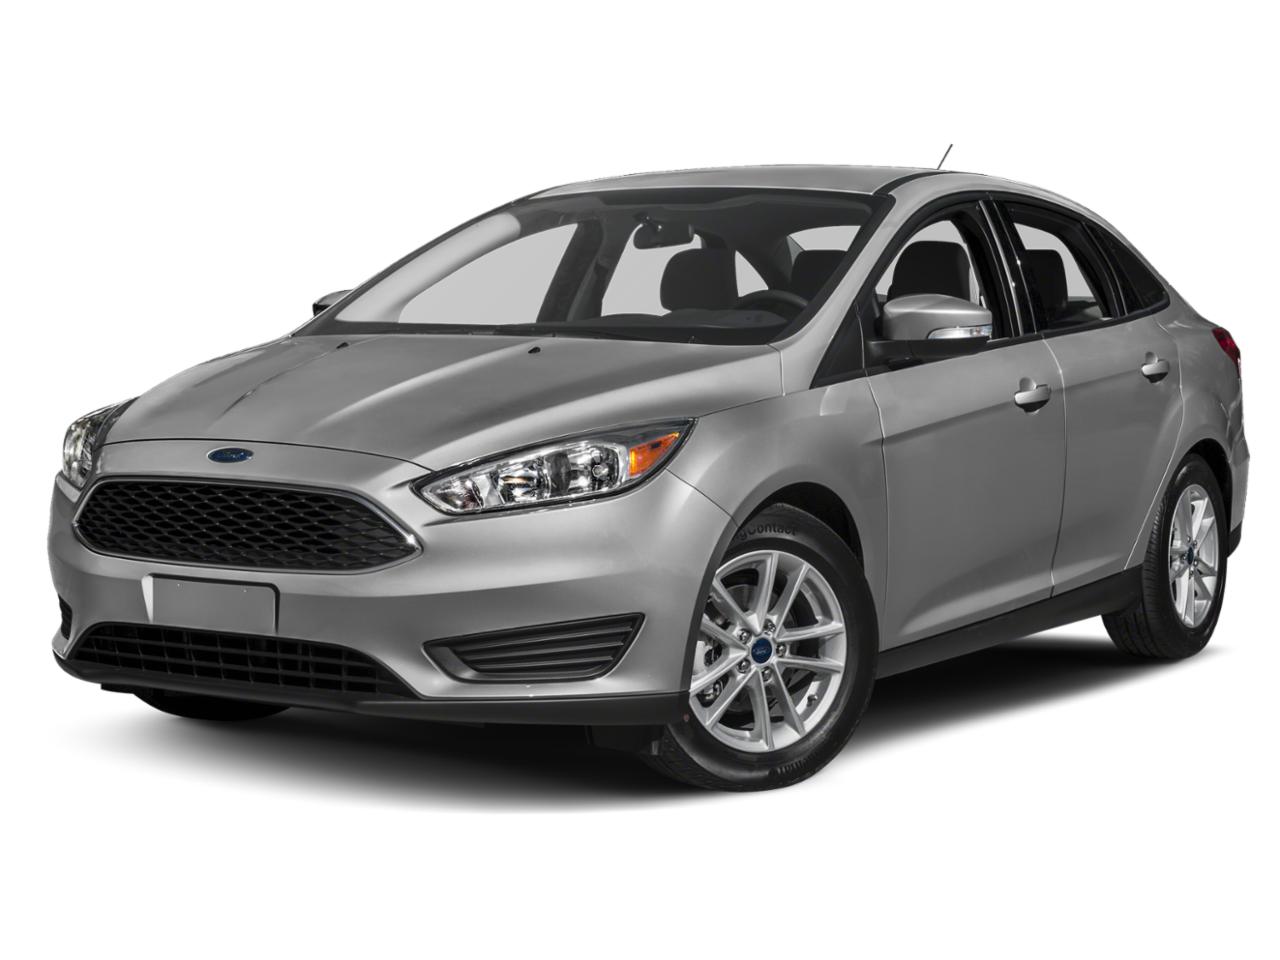 2018 Ford Focus Vehicle Photo in Winslow, AZ 86047-2439